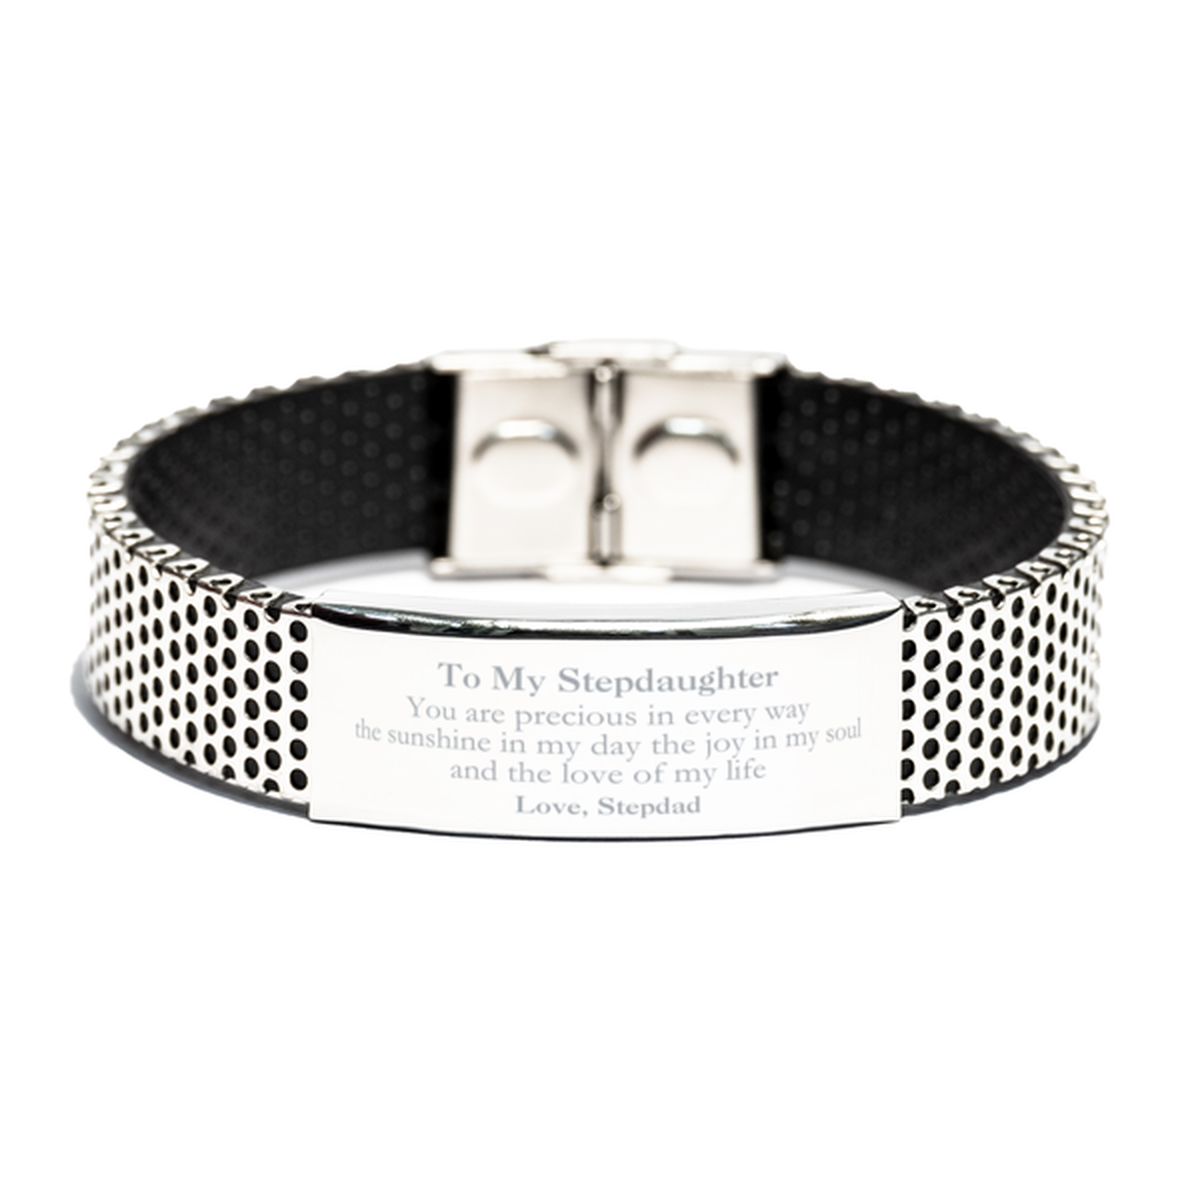 Graduation Gifts for Stepdaughter Stainless Steel Bracelet Present from Stepdad, Christmas Stepdaughter Birthday Gifts Stepdaughter You are precious in every way the sunshine in my day. Love, Stepdad